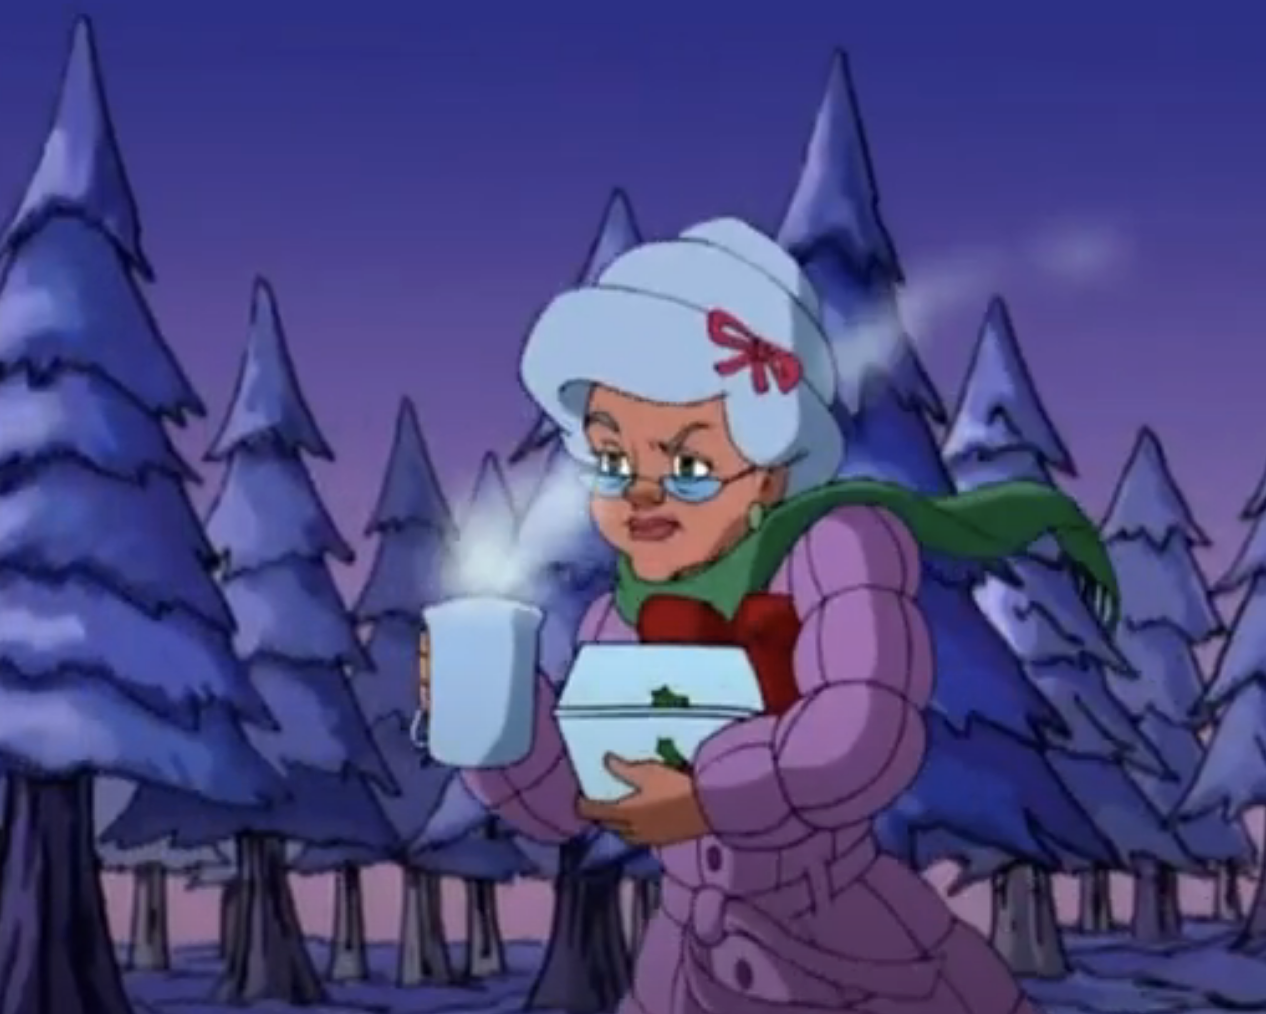 Animated character Granny from Looney Tunes, holding a hot beverage and gift, in a snowy forest